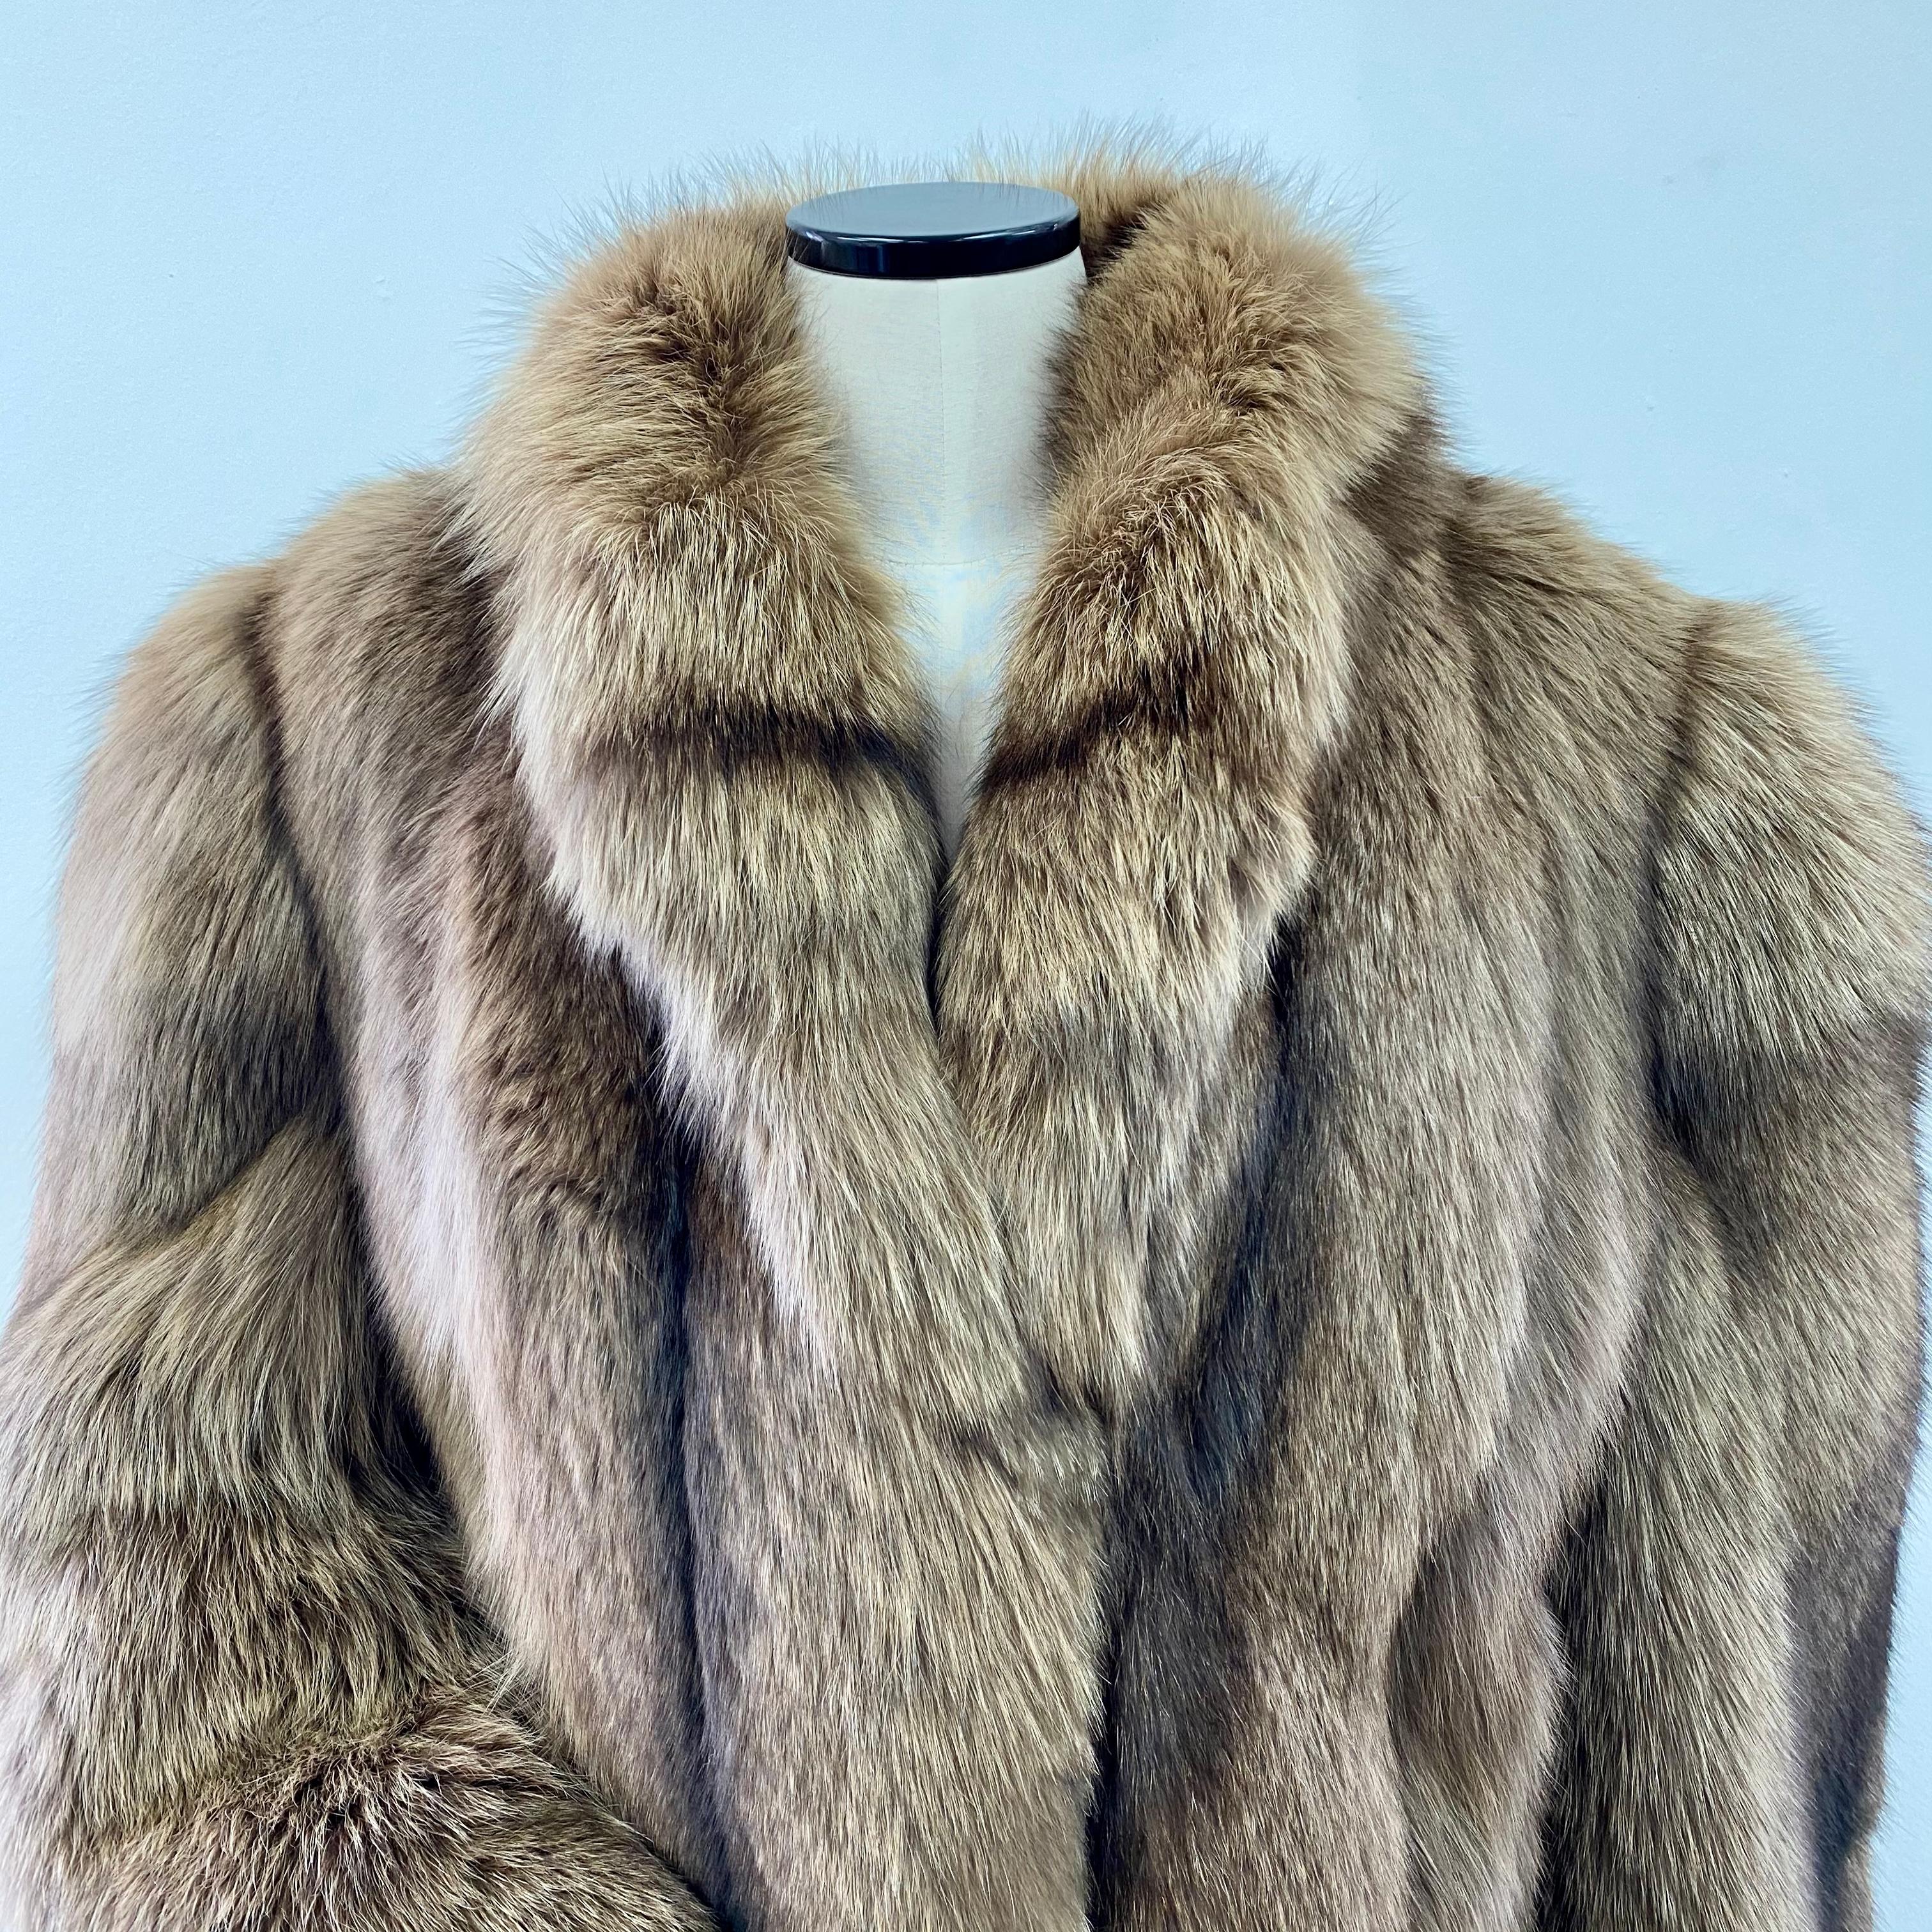 PRODUCT DESCRIPTION:

Holt Renfrew dyed silver fox fur stroller coat

Condition: Pristine

Closure: German hooks

Color: Brown

Material: Silver fox fur

Garment type: Stroller Coat

Sleeves: Straight

Pockets: Two side pockets

Collar: